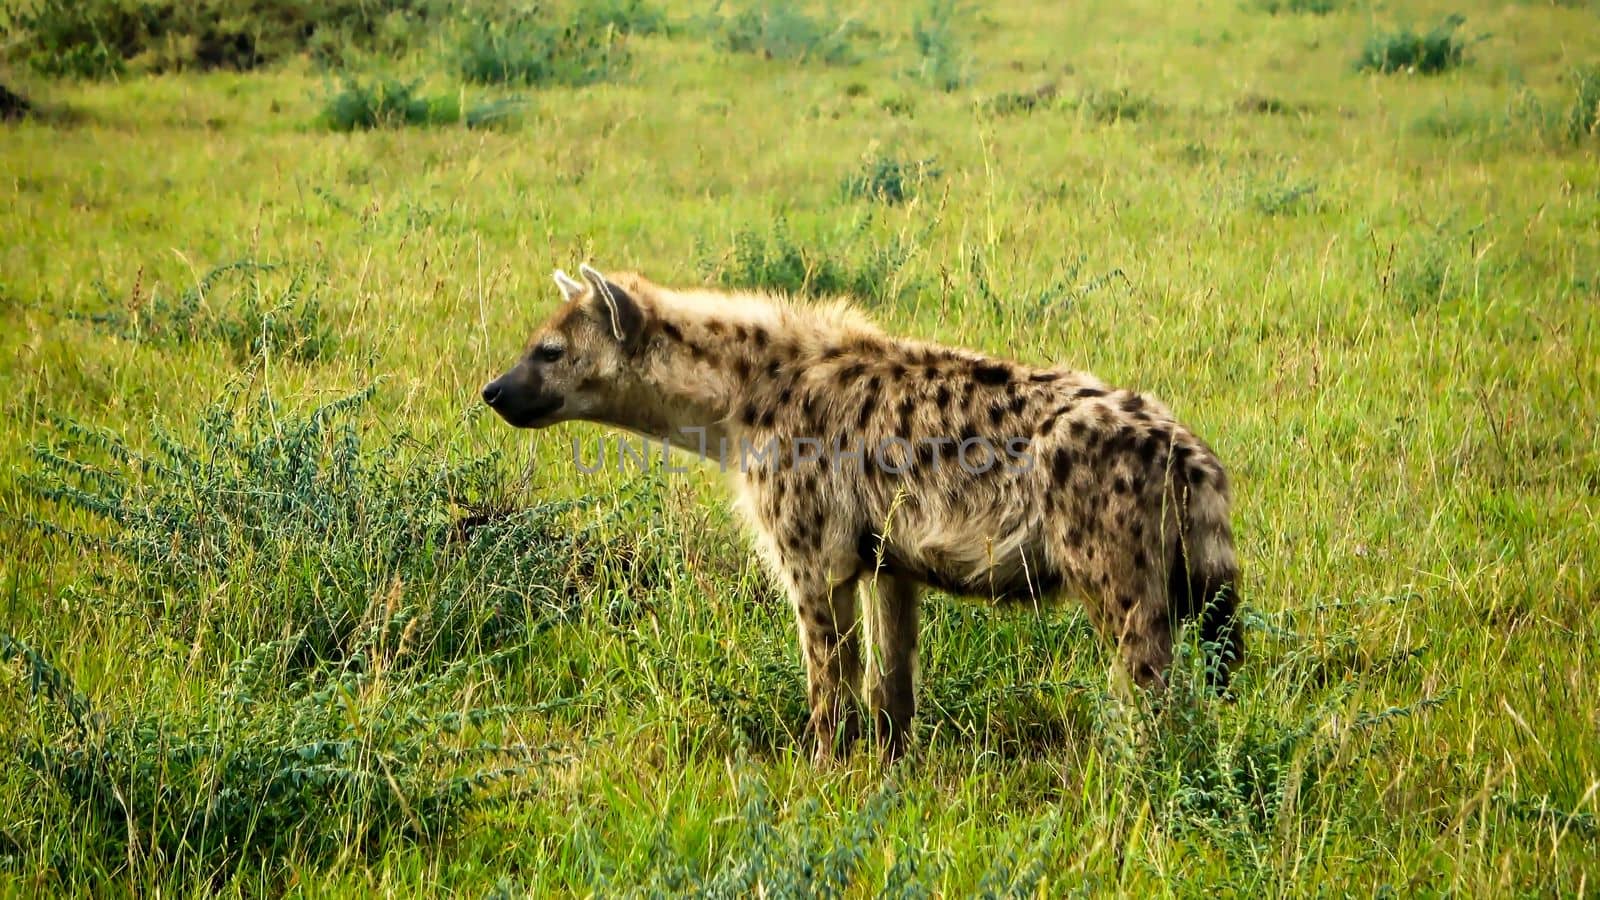 Wild hyenas in the savannah of Africa. by MP_foto71